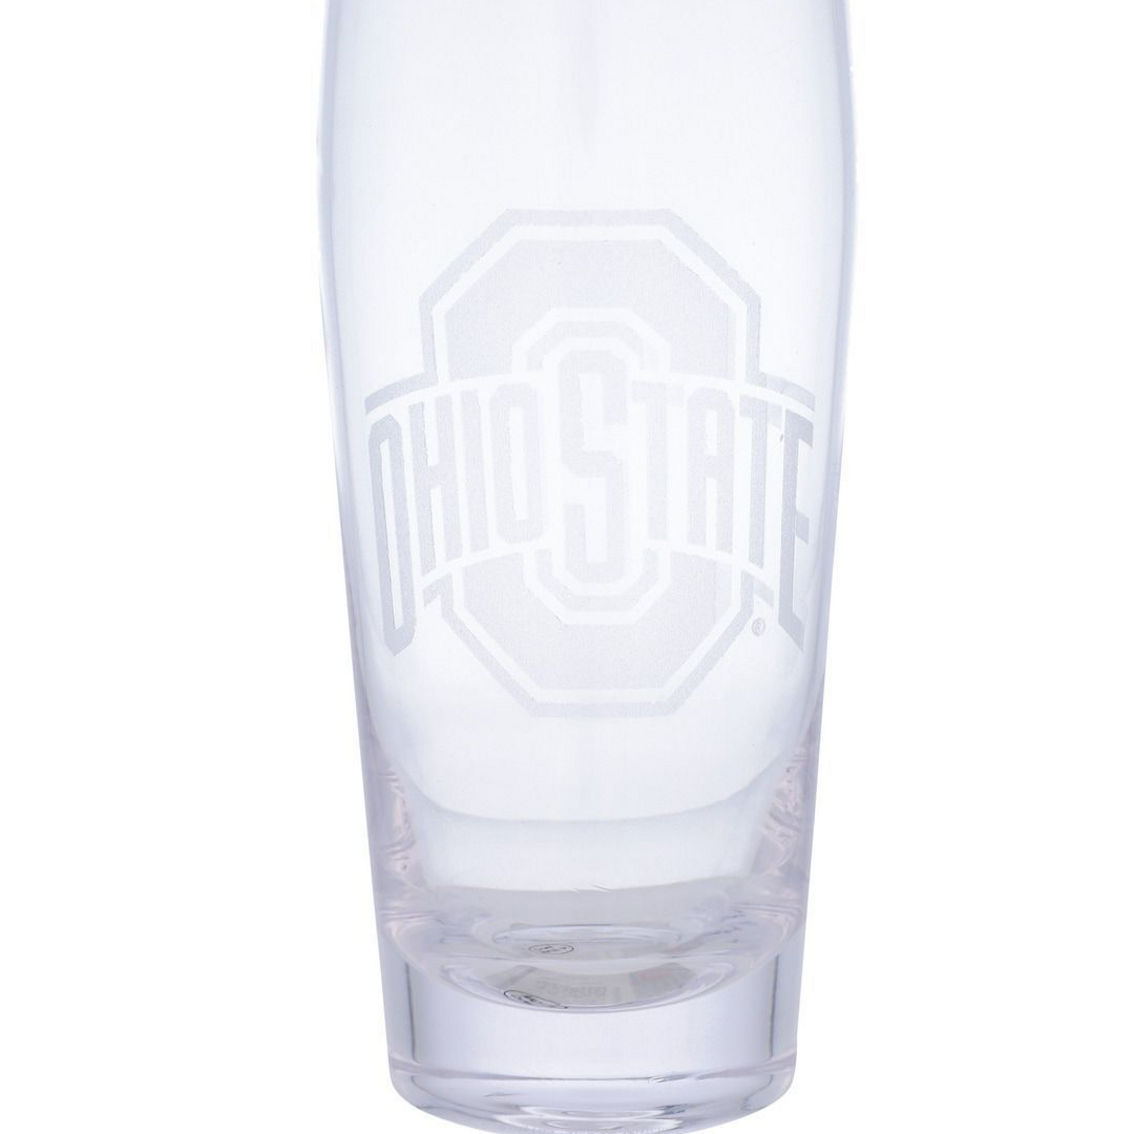 Ohio State Buckeyes Team Color 2-Pack 16oz. Pint Glass Set